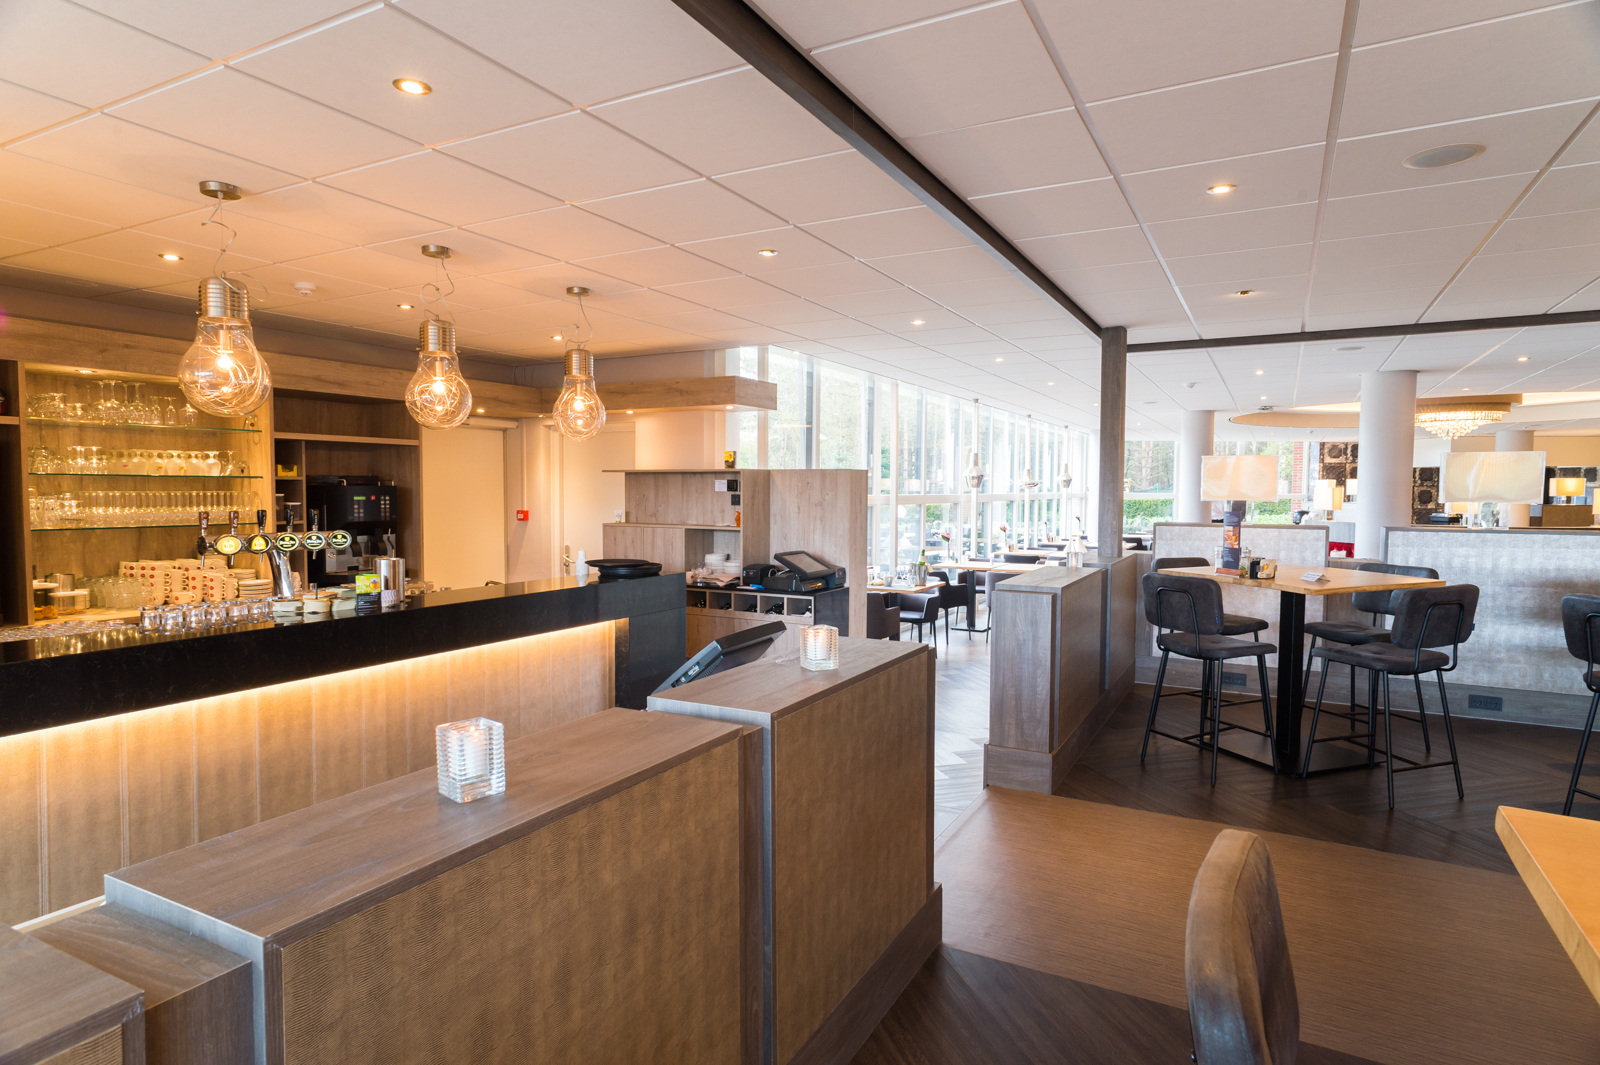 Hotel Asteria Venray <br/>69.00 ew <br/> <a href='http://vakantieoplossing.nl/outpage/?id=458316e451d93fa6910c80c8a3f5452b' target='_blank'>View Details</a>